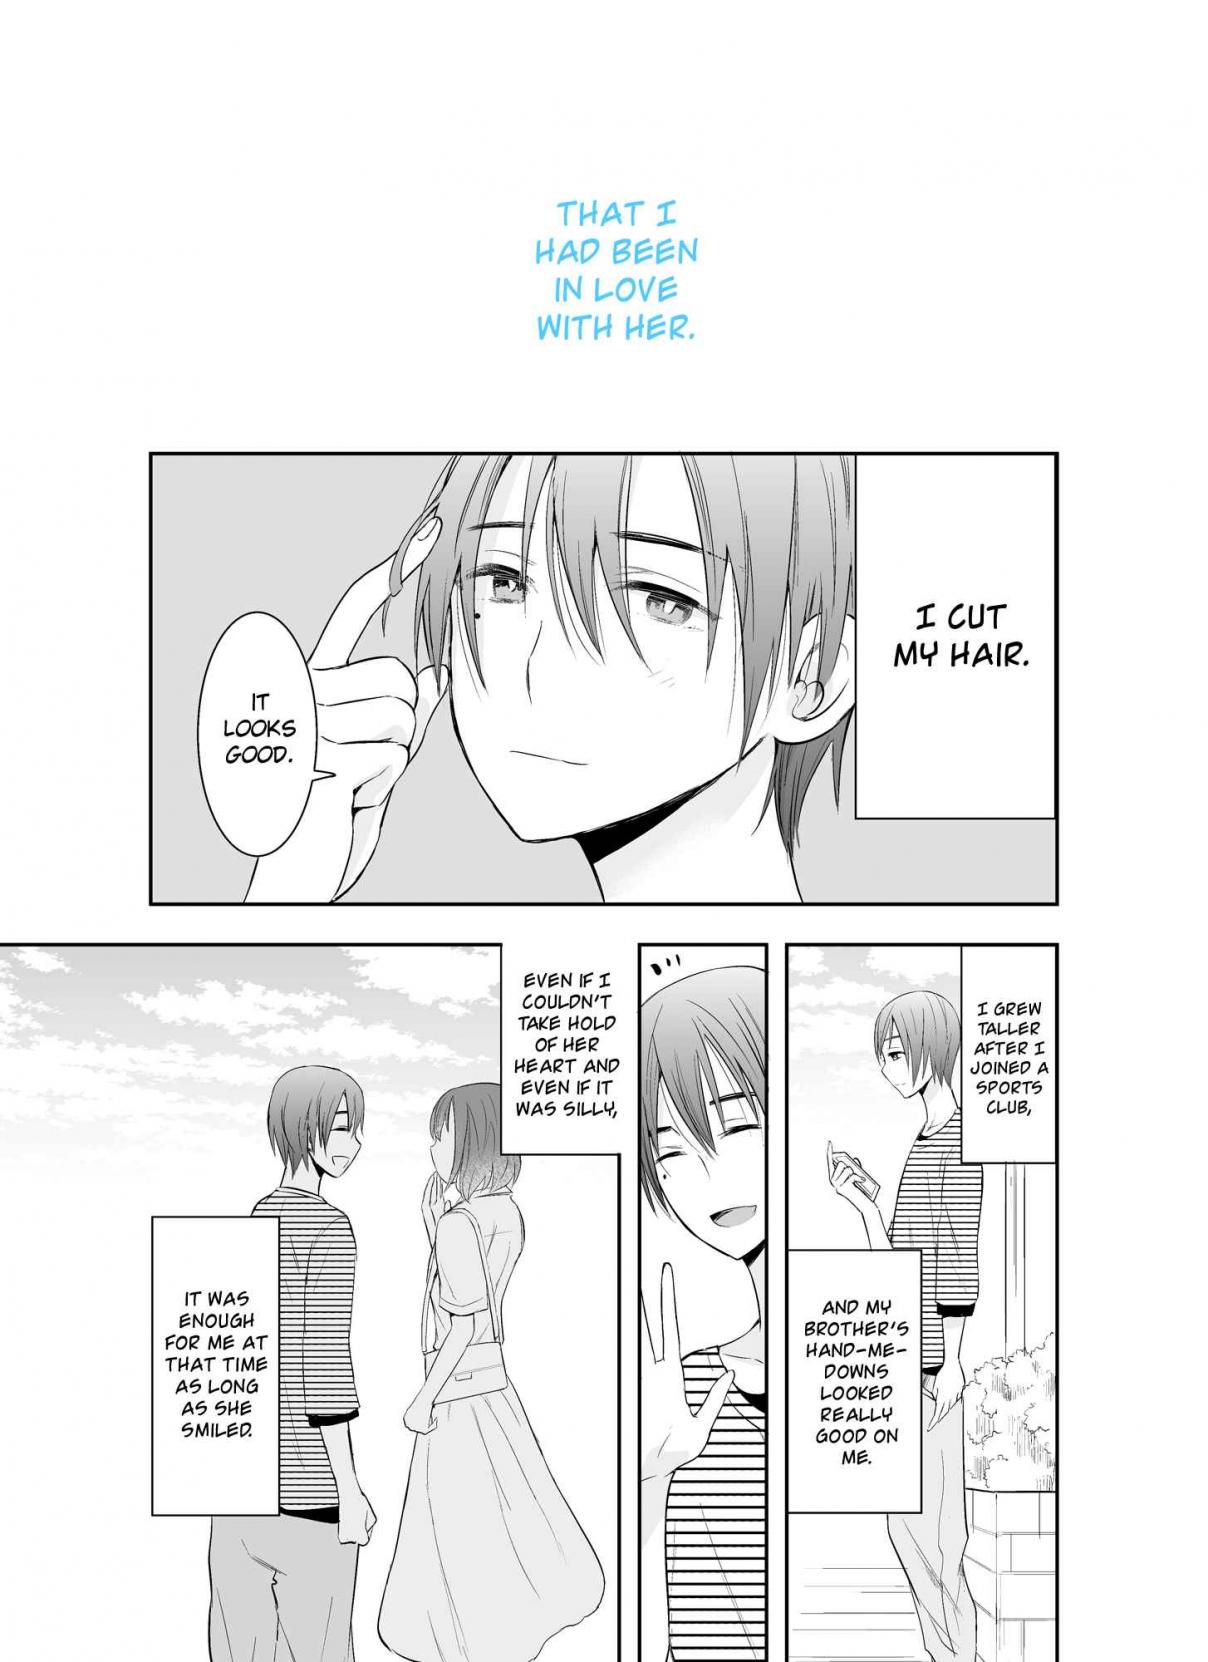 We Can't Draw Love Vol. 2 Ch. 21.2